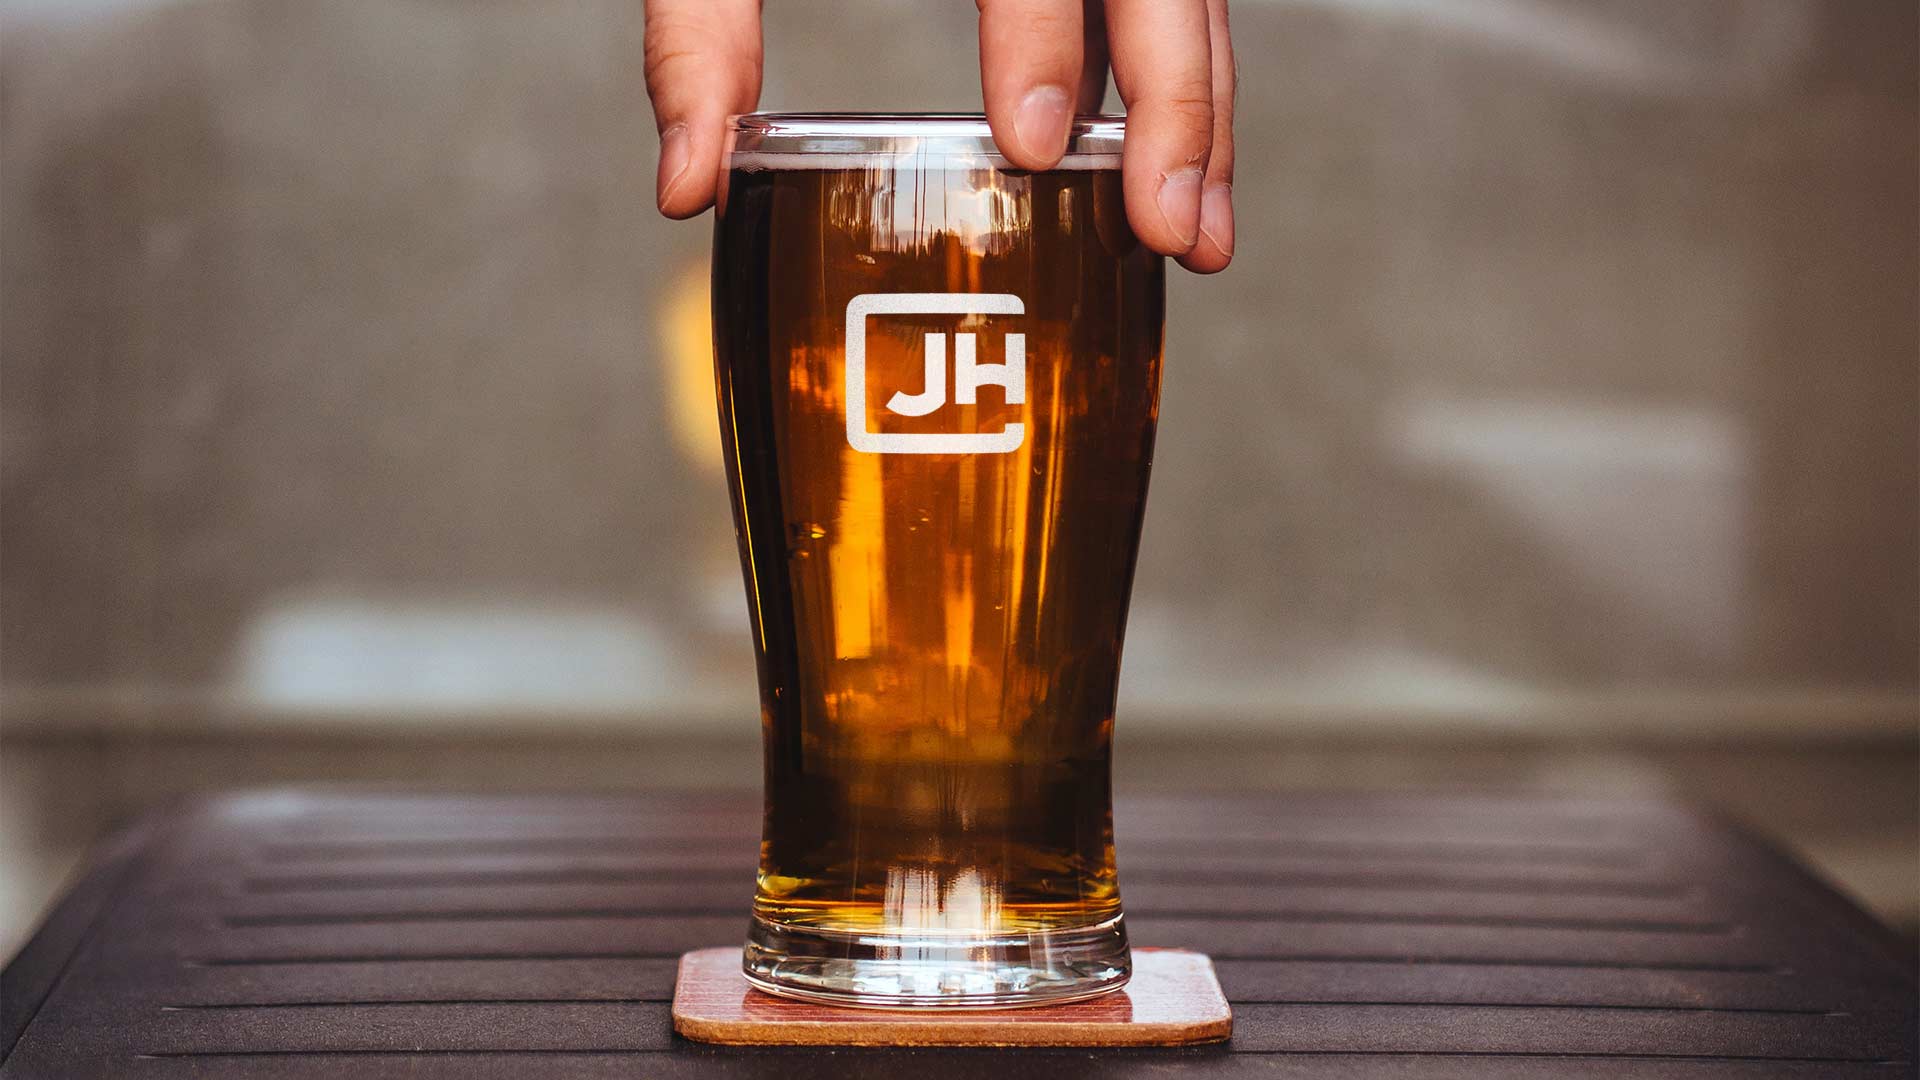 Sample pint glass with JH logo